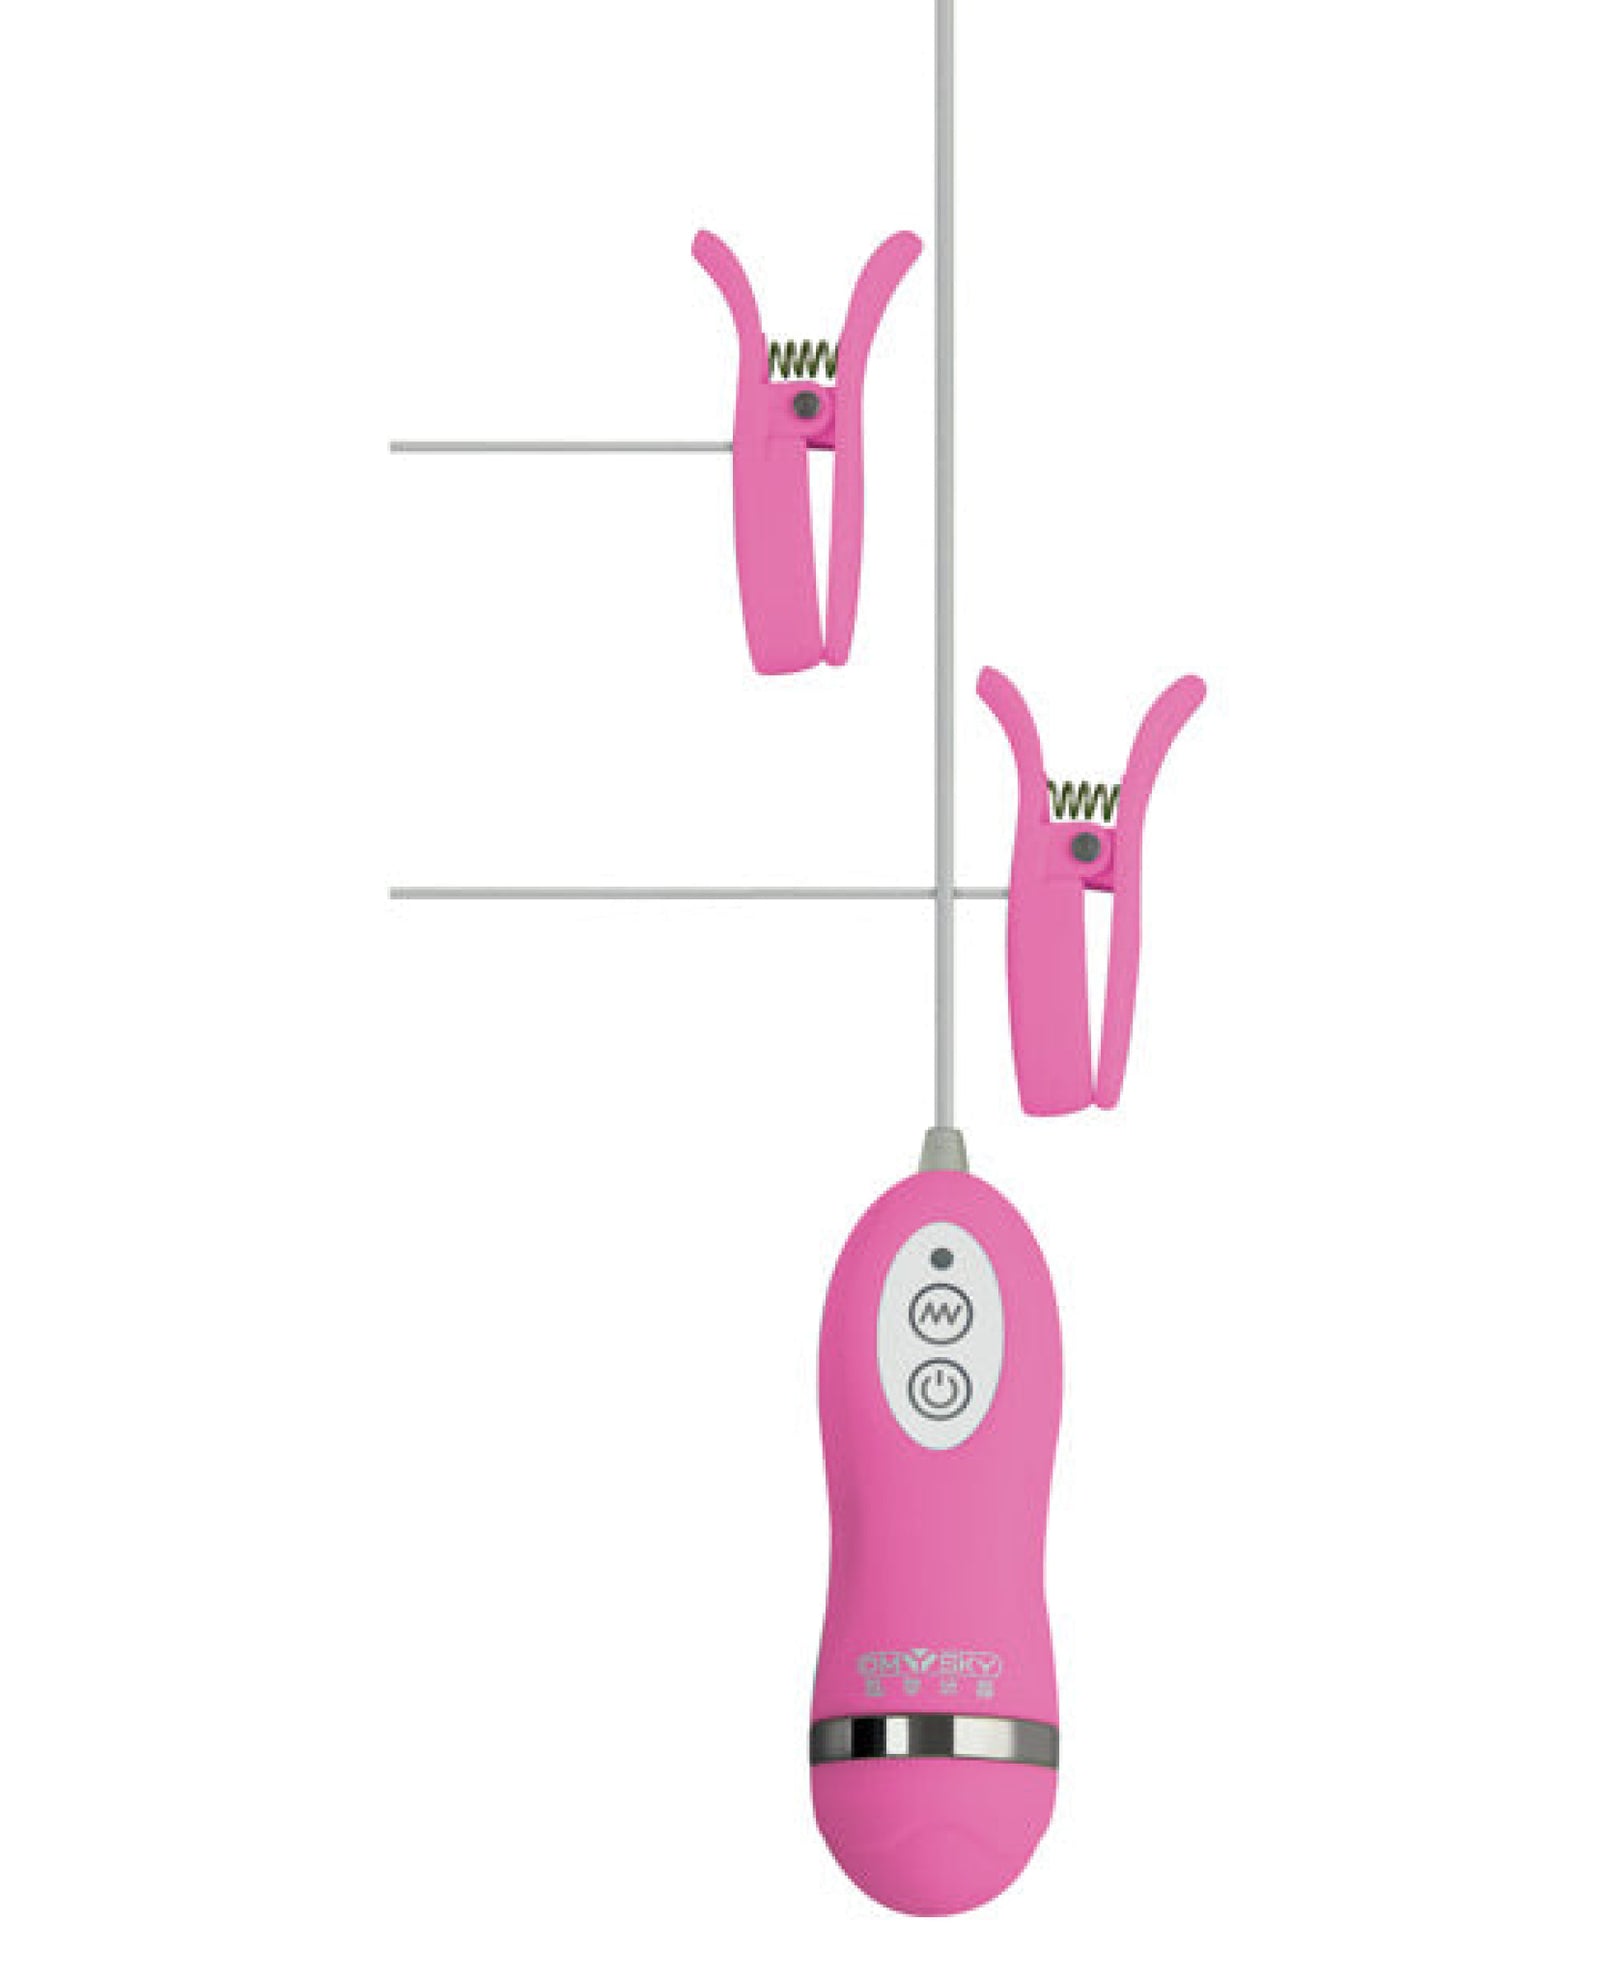 Gigaluv Vibro Clamps - 10 Functions Gigaluv